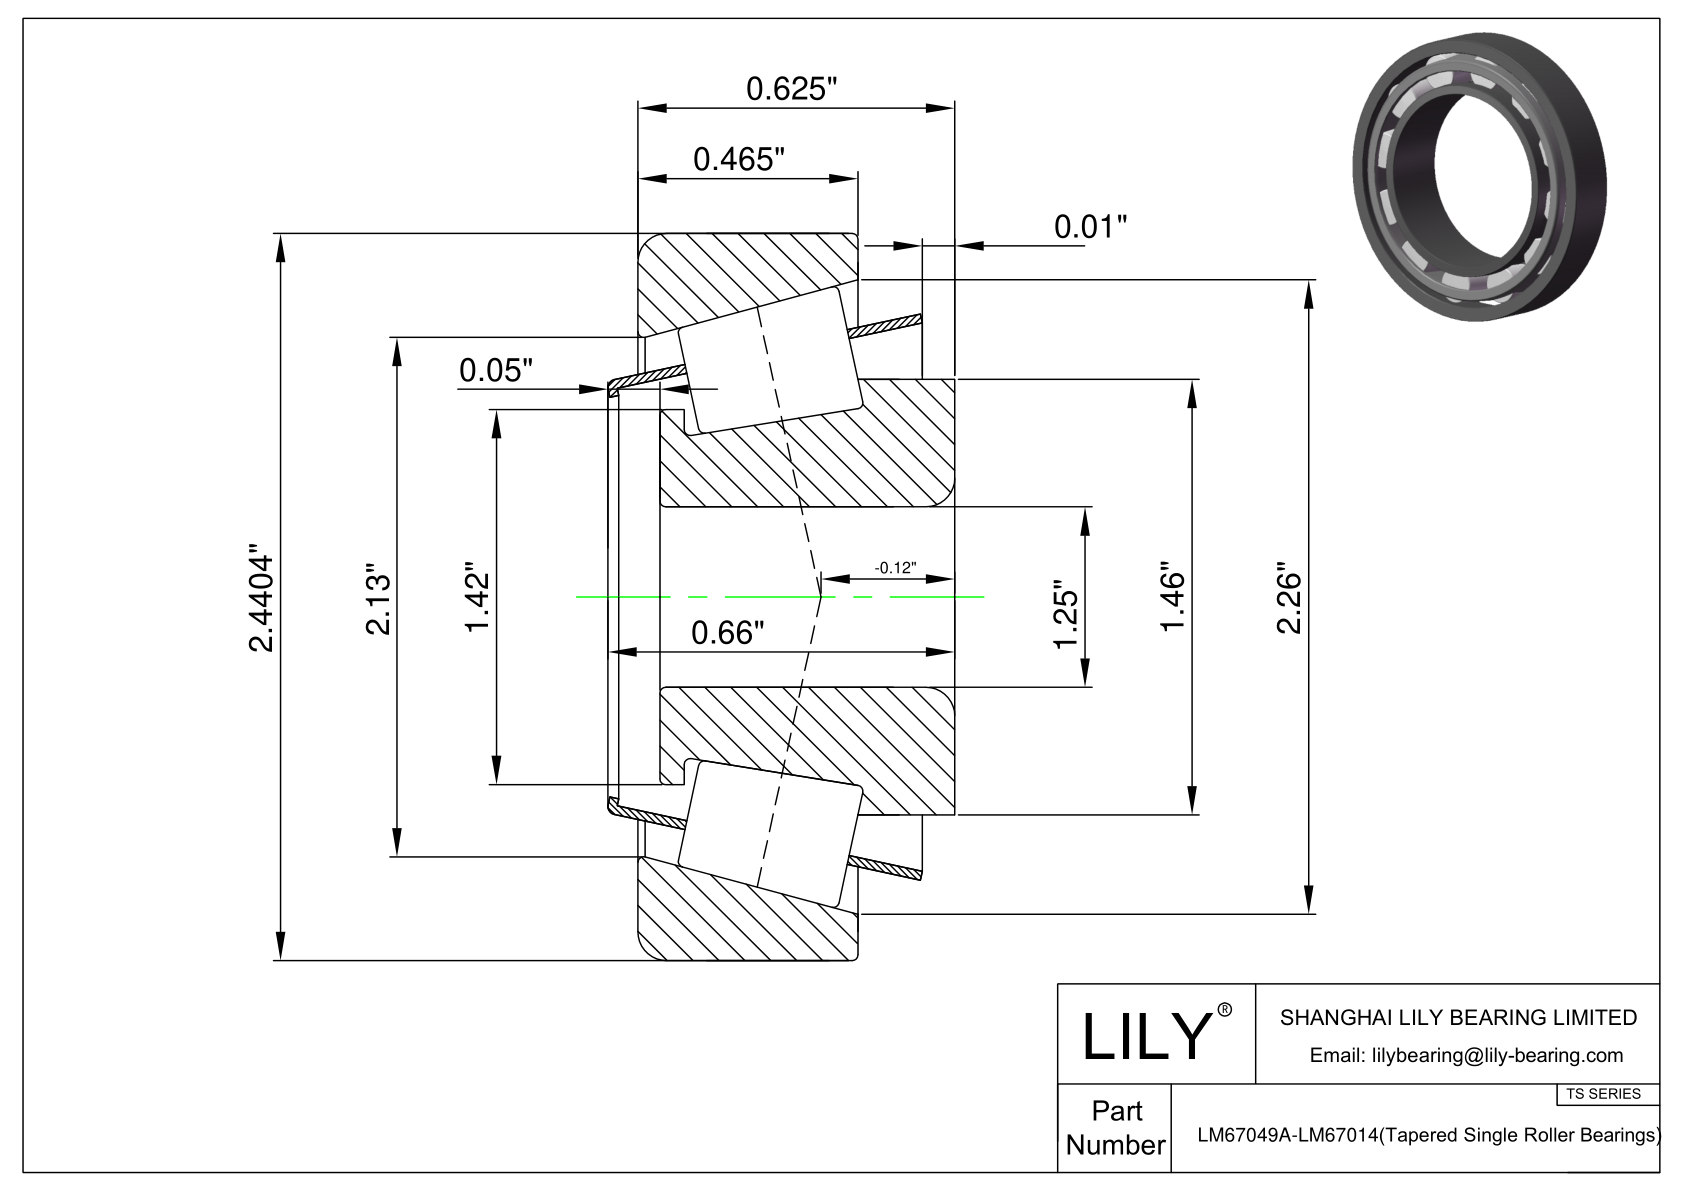 LM67049A-LM67014 TS (Tapered Single Roller Bearings) (Imperial) cad drawing